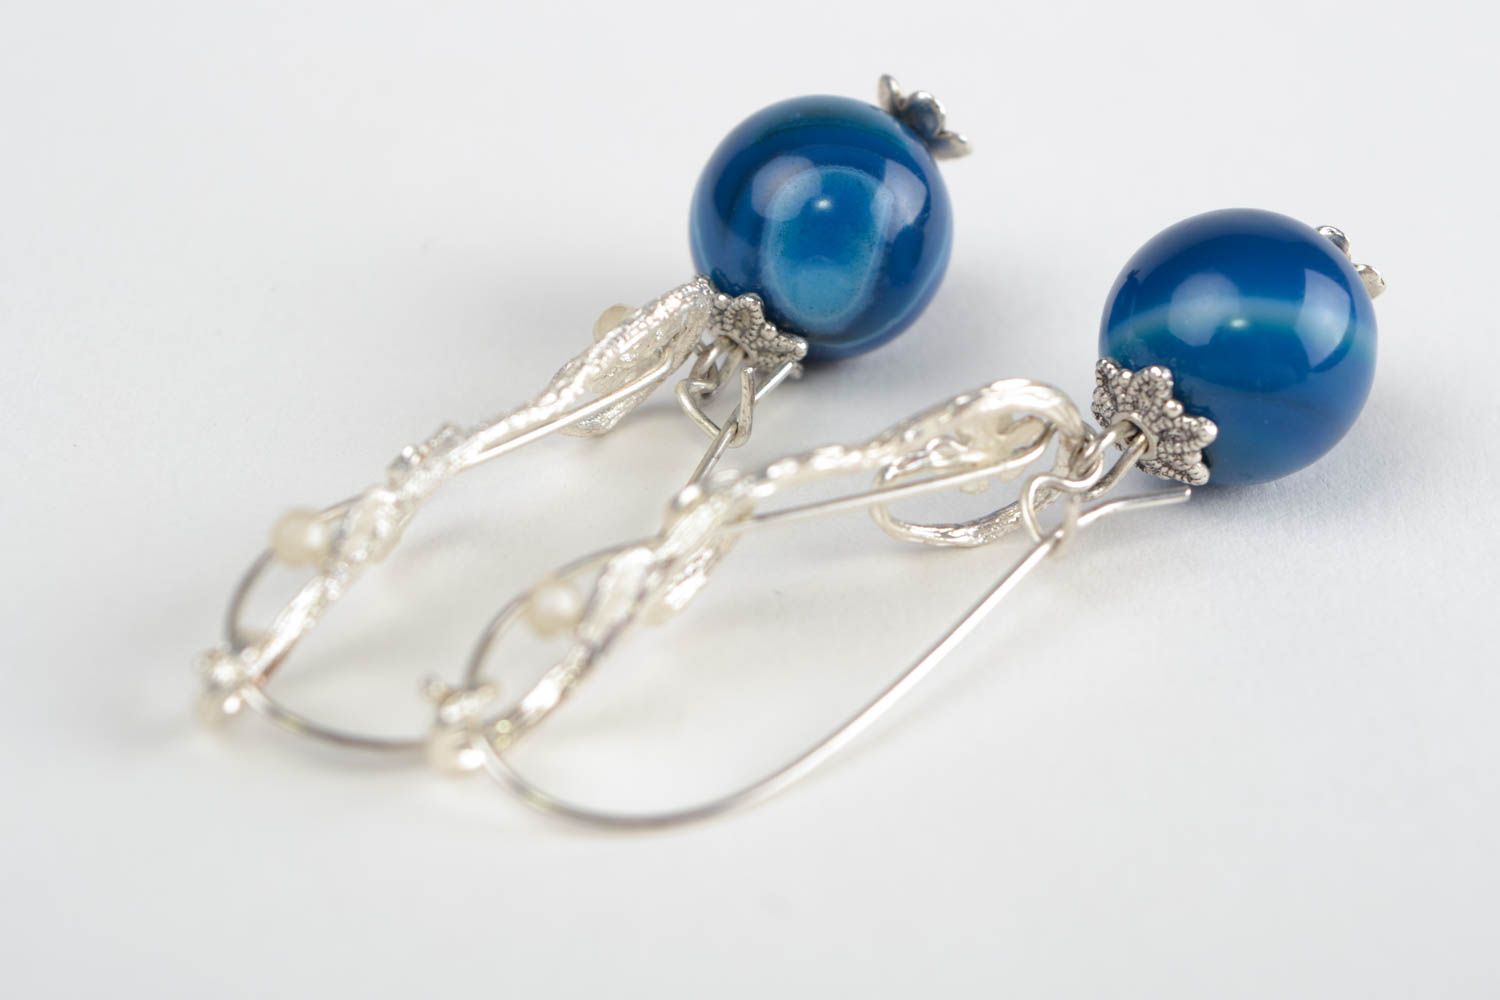 Handmade dangling earrings with silver colored fittings and blue agate beads photo 5